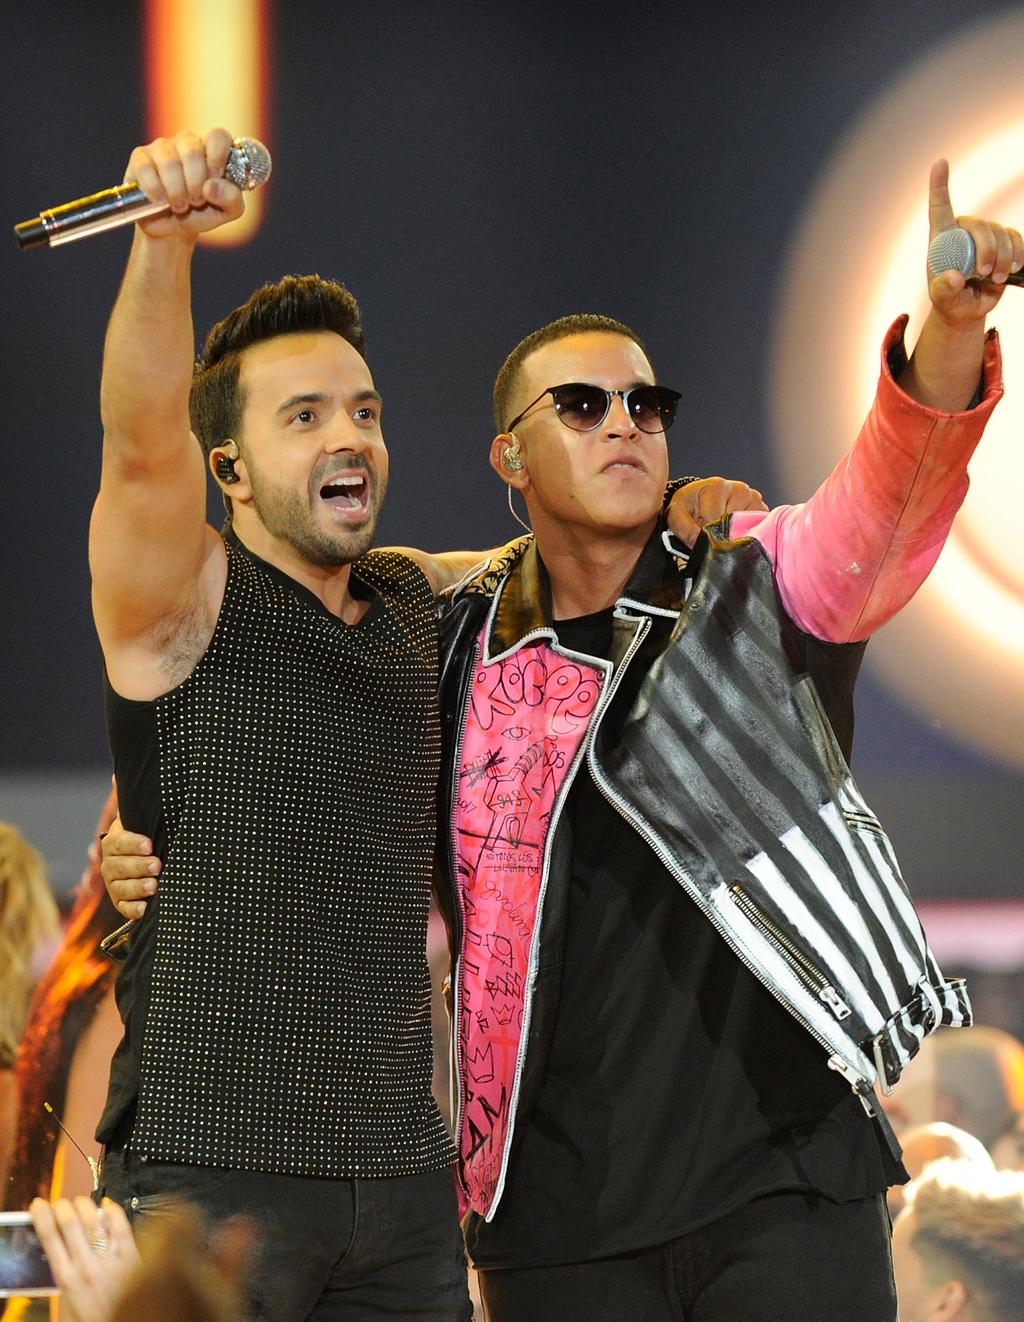 YEAR-END 2017 TOP STORIES DESPACITO 162 MILLION number of Canadian streams, finishing 2017 as the No. 2 most-streamed song 16 WEEKS time spent at No.